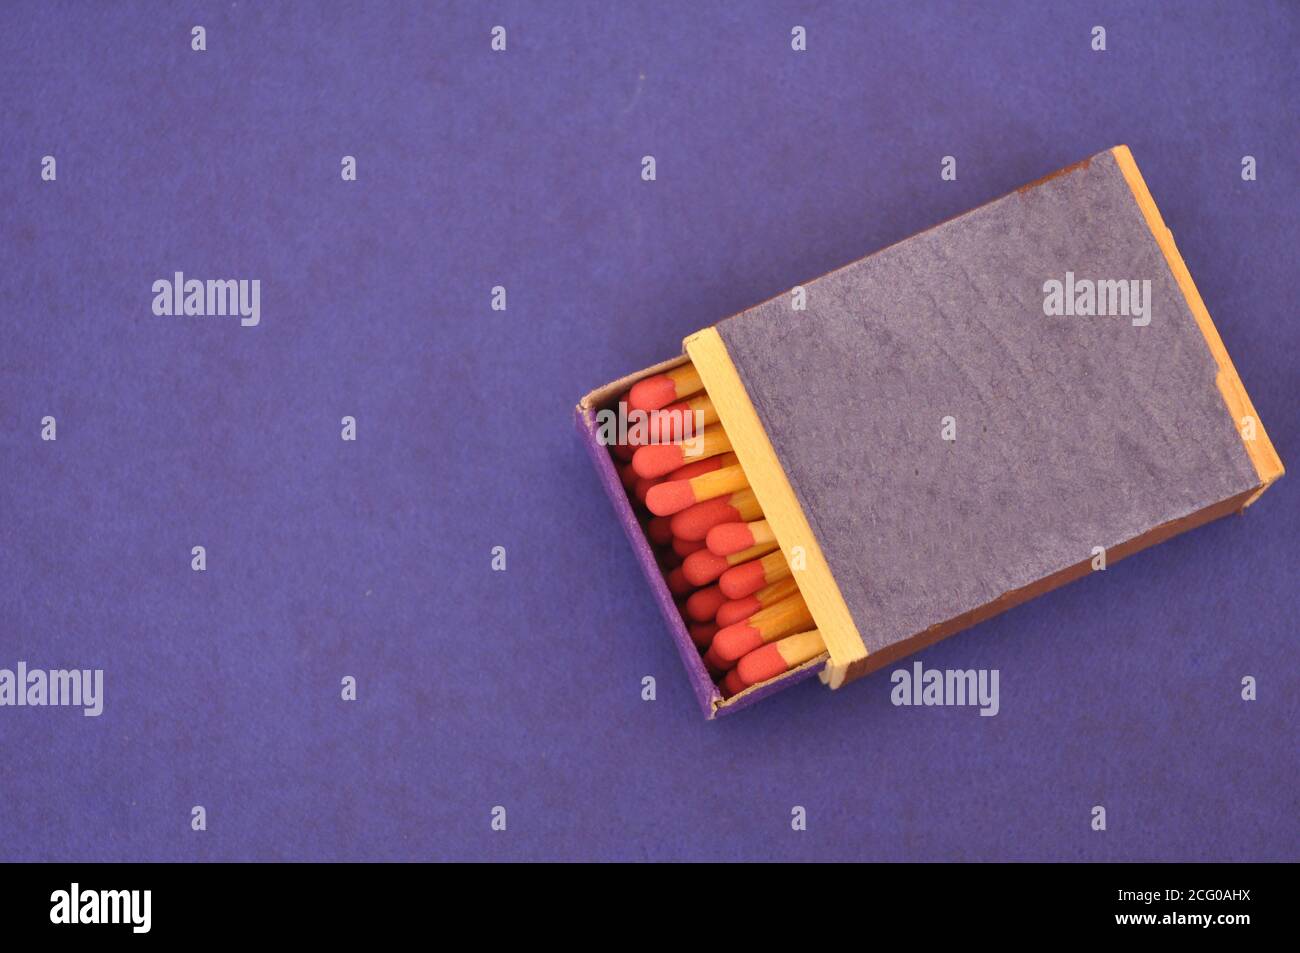 Matchbox, wooden, matchsticks with red head in a half-open box, on a blue background, with copy space Stock Photo